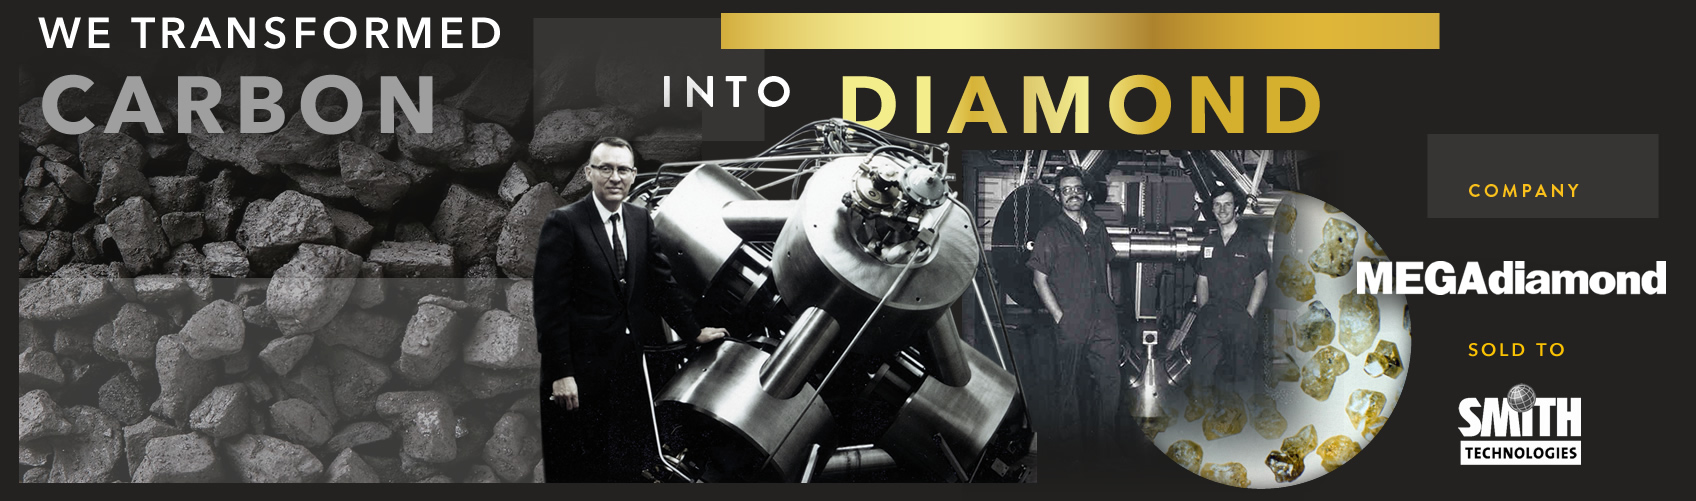 We transformed carbon into diamonds. MegaDiamond was started in 1966 and purchased by Smith International (now SLB) in 1985.